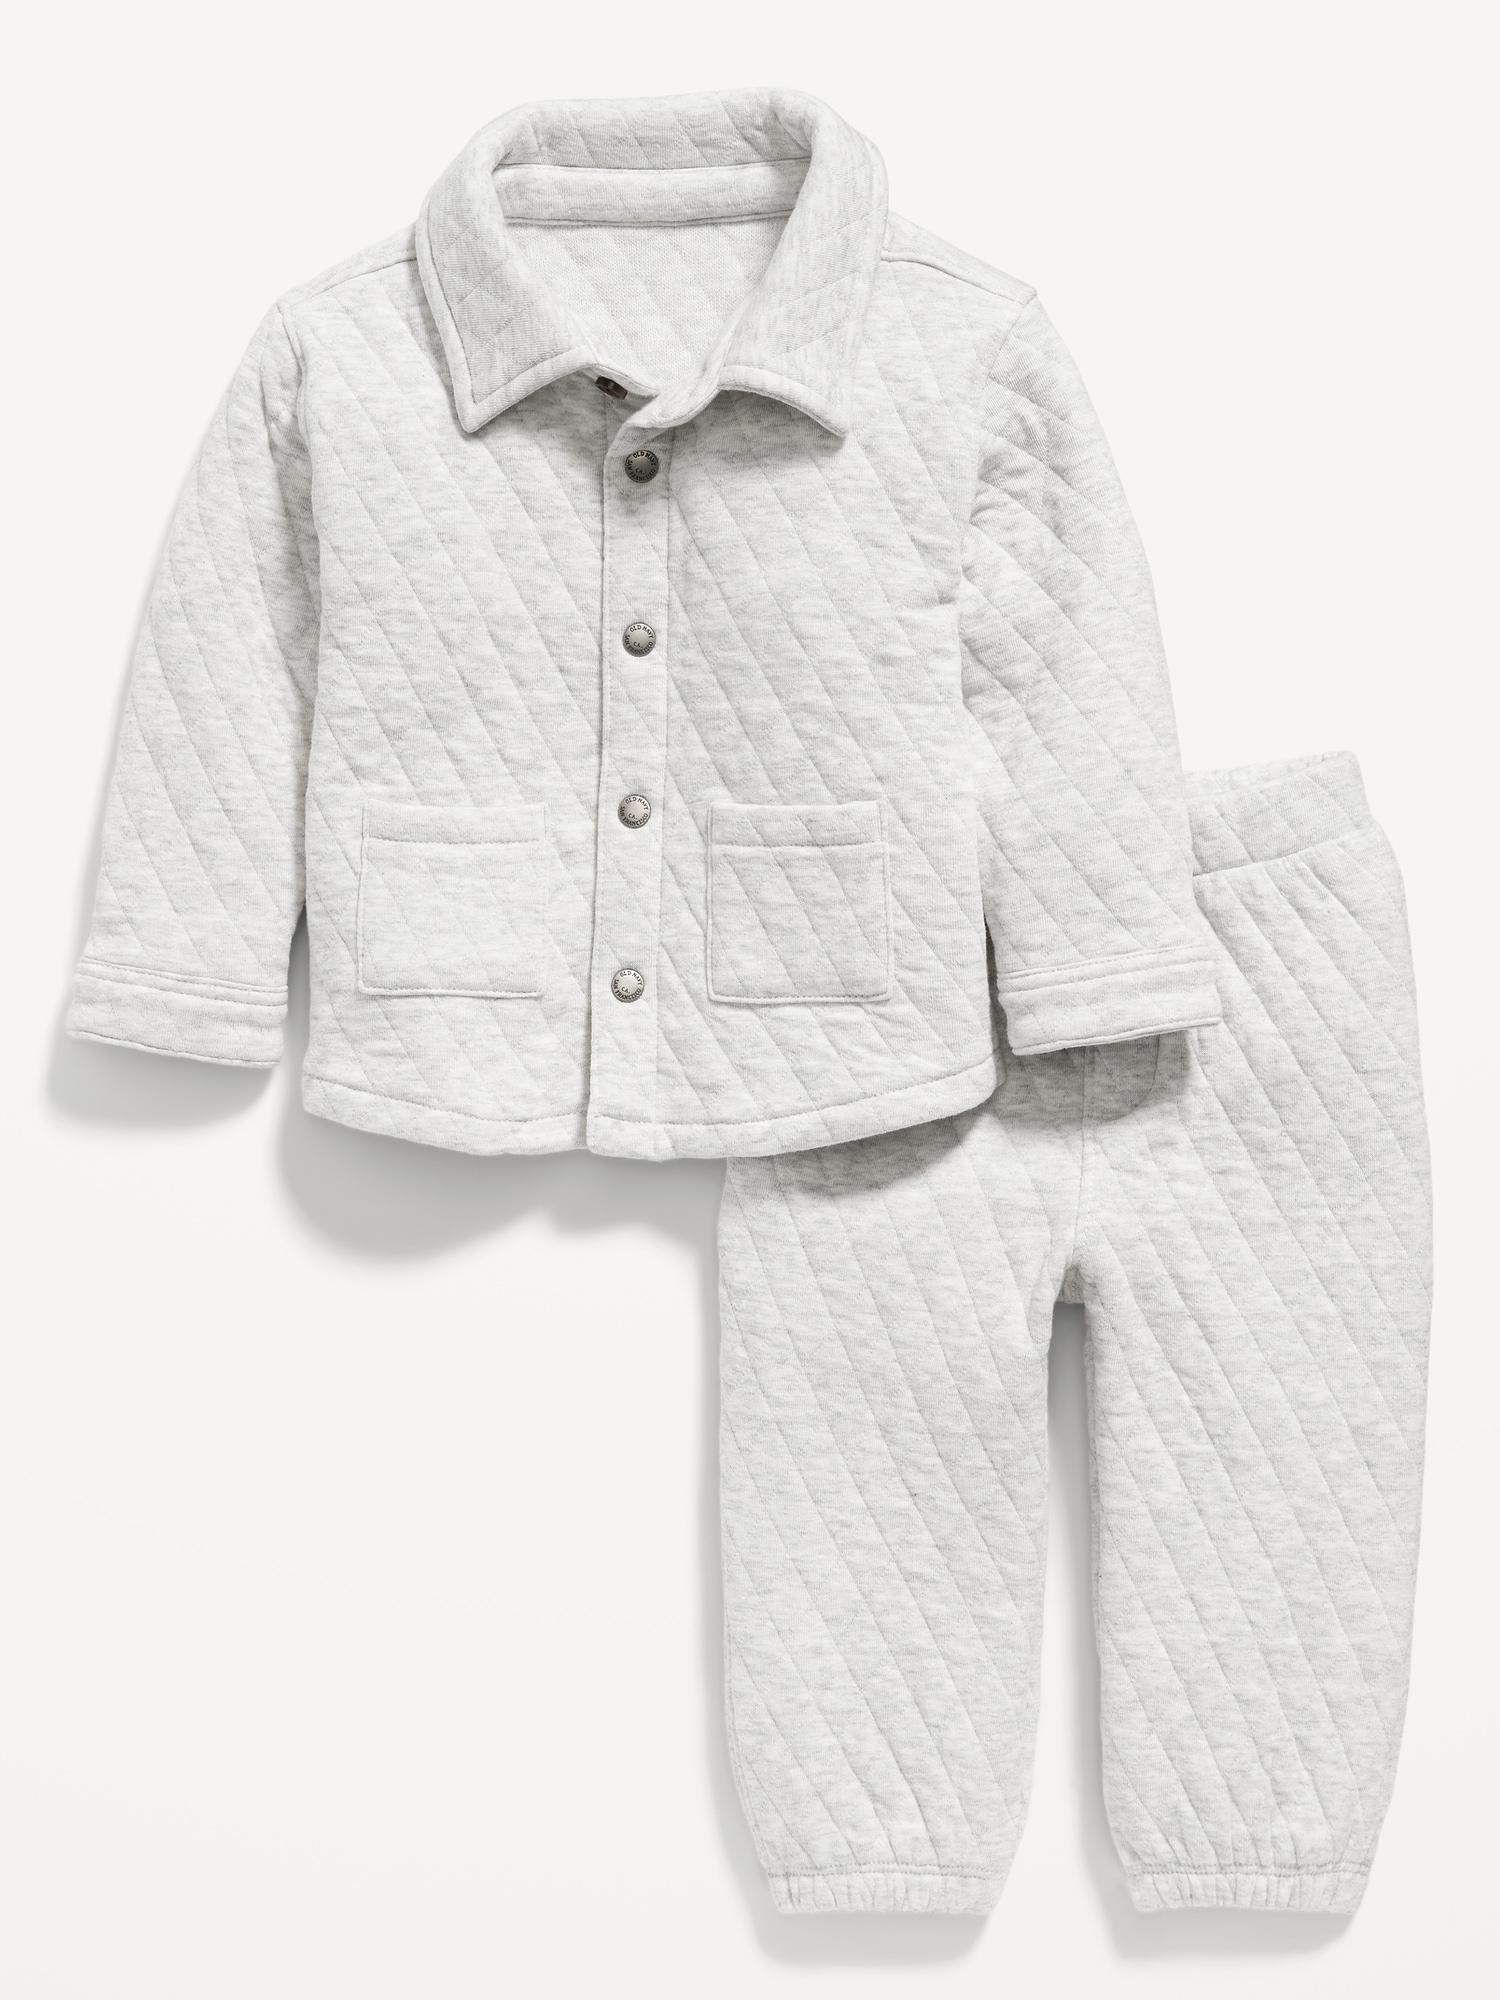 Unisex Quilted Pocket Shirt and Sweatpants Set for Baby